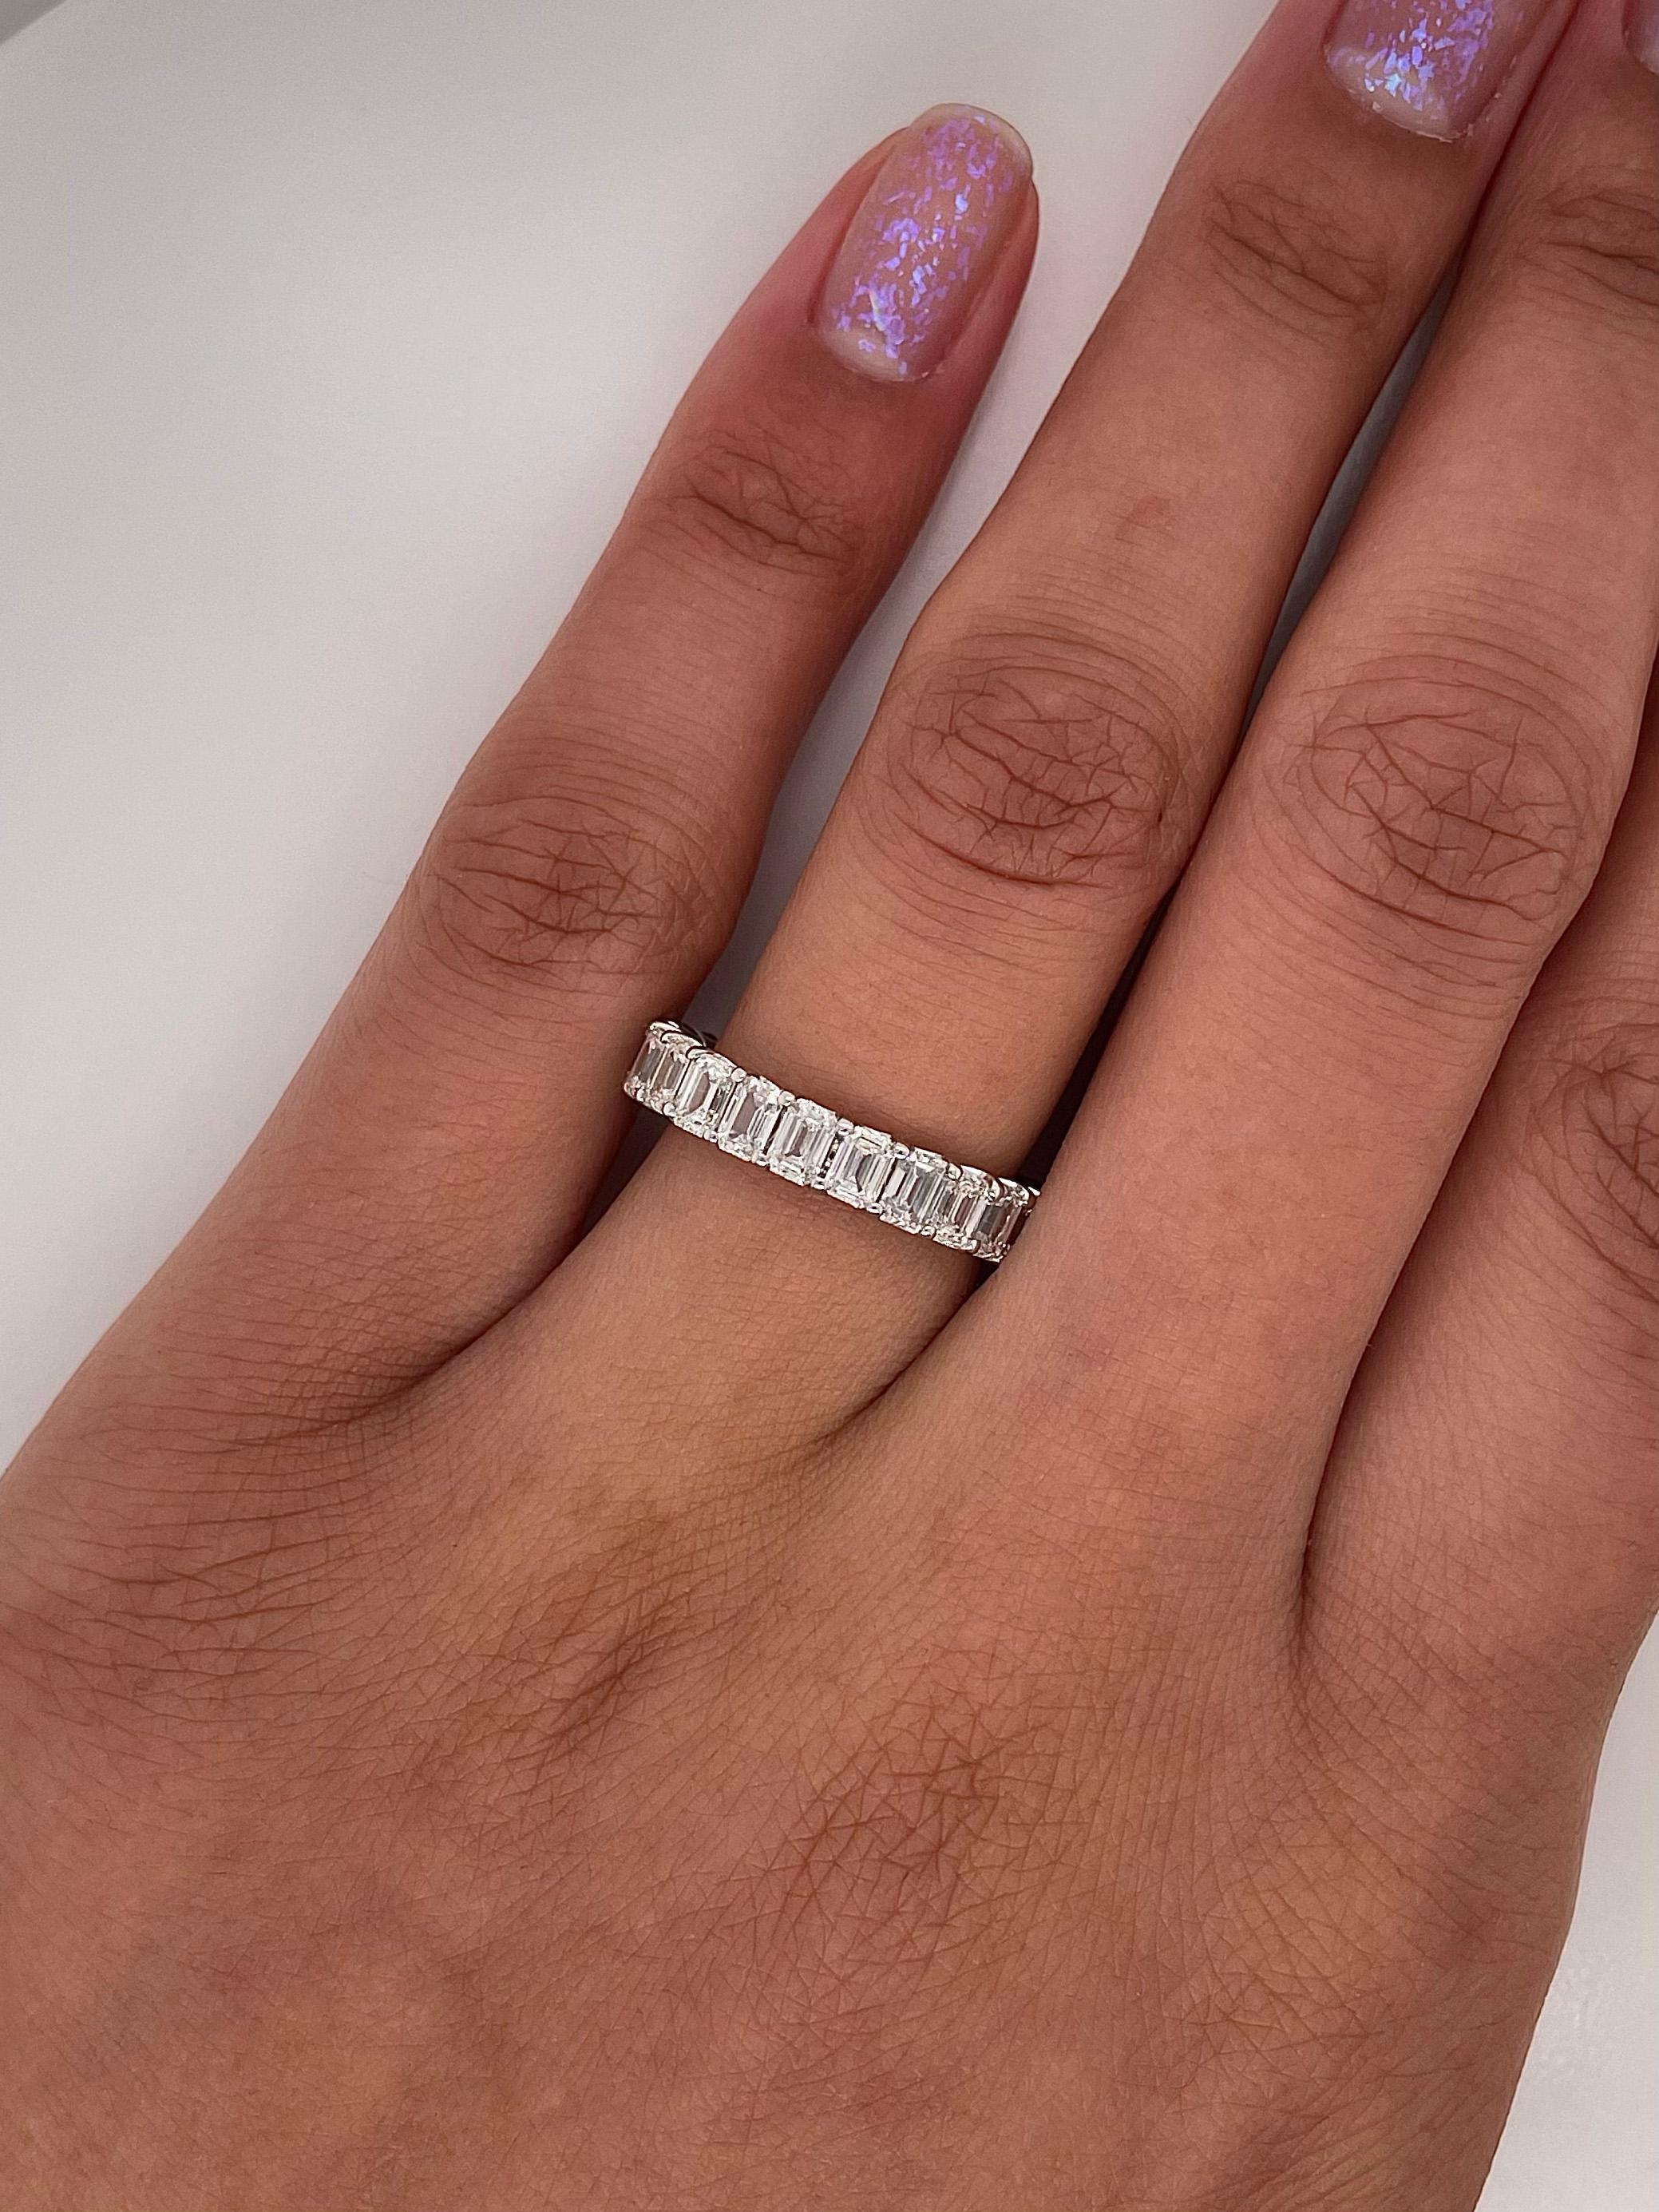 Ladies Diamond Eternity band carries 3.49 Total Carats of Emerald Cut Diamonds placed in Platinum.

Size: 6.0
Color: F
Clarity: VS

This shared prong style Eternity band was handmade by our jewelers in New York City
